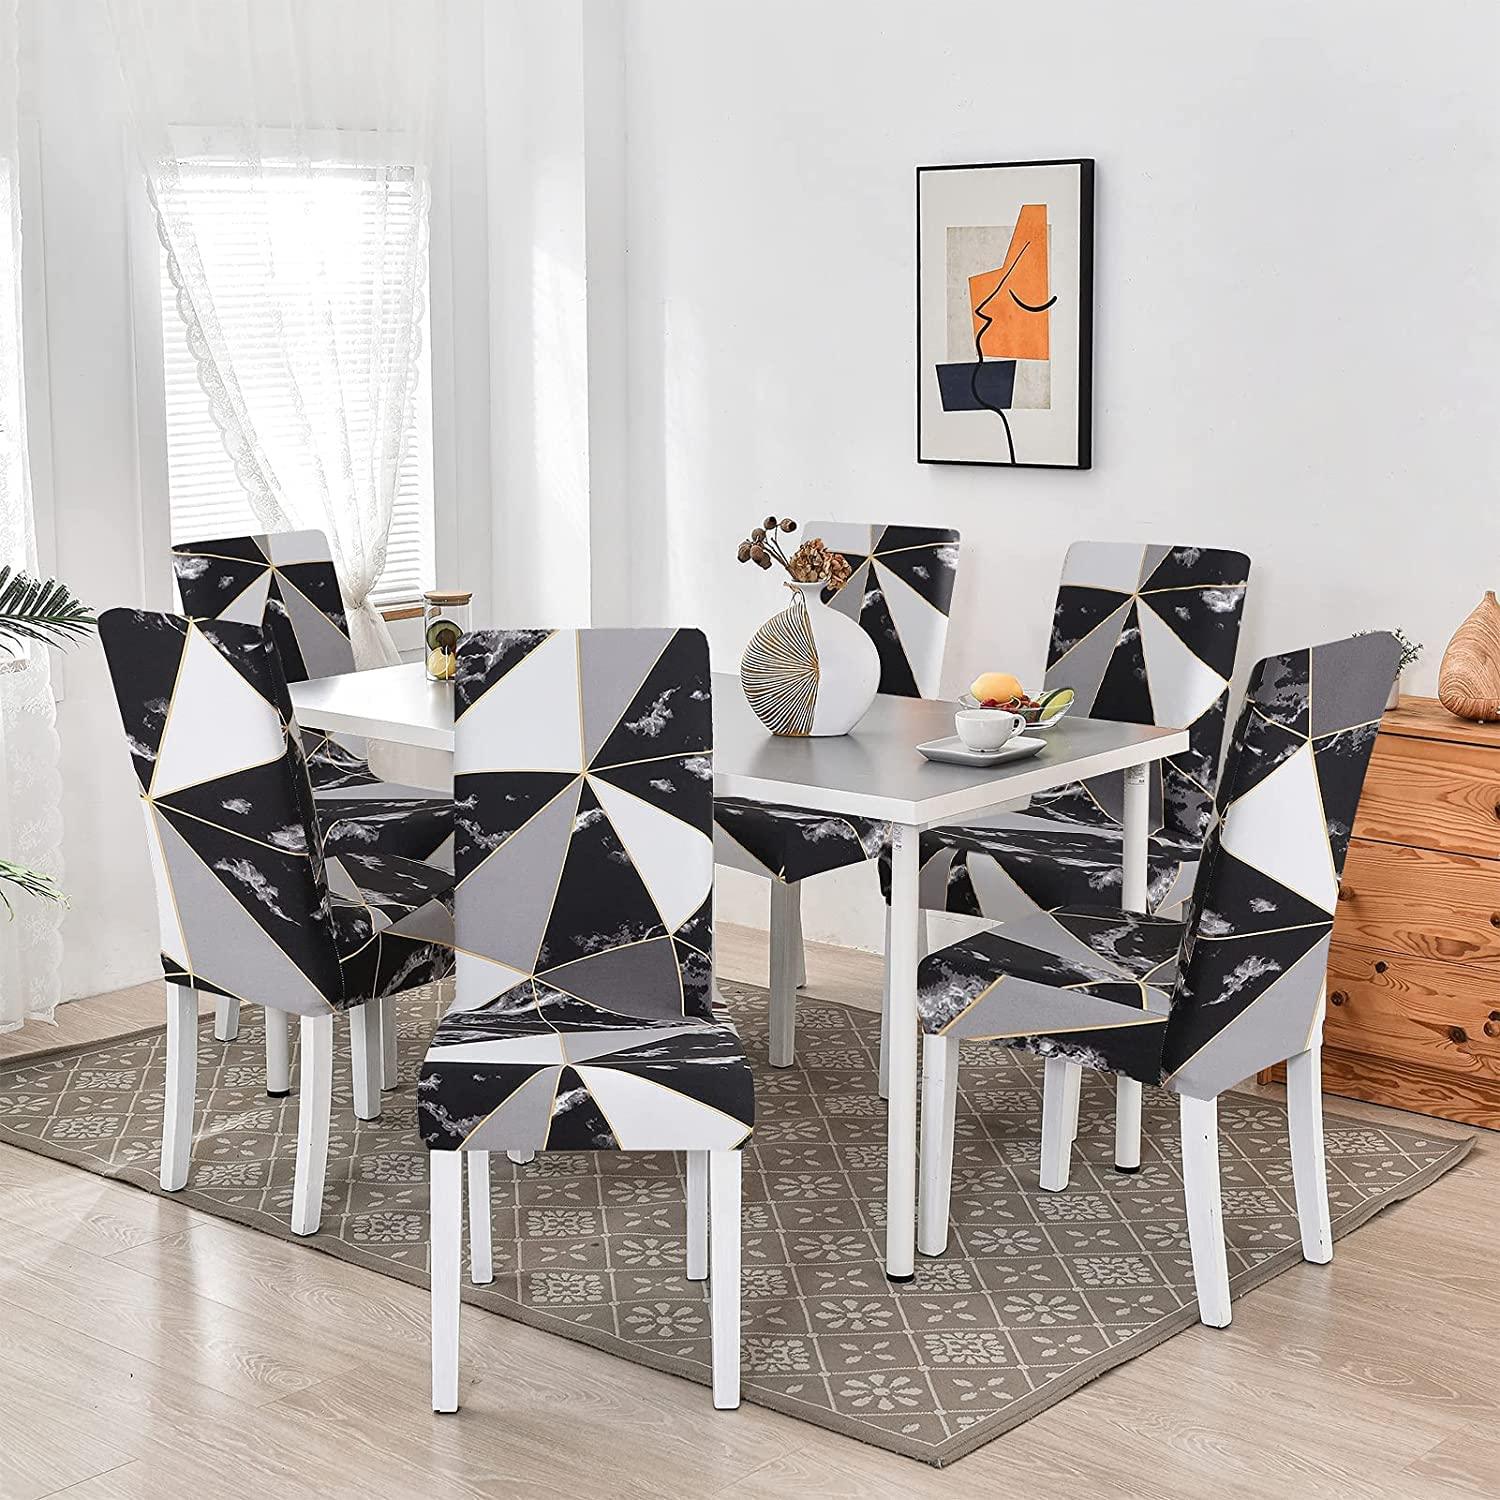 Stretchable Chair Covers, Marble Black